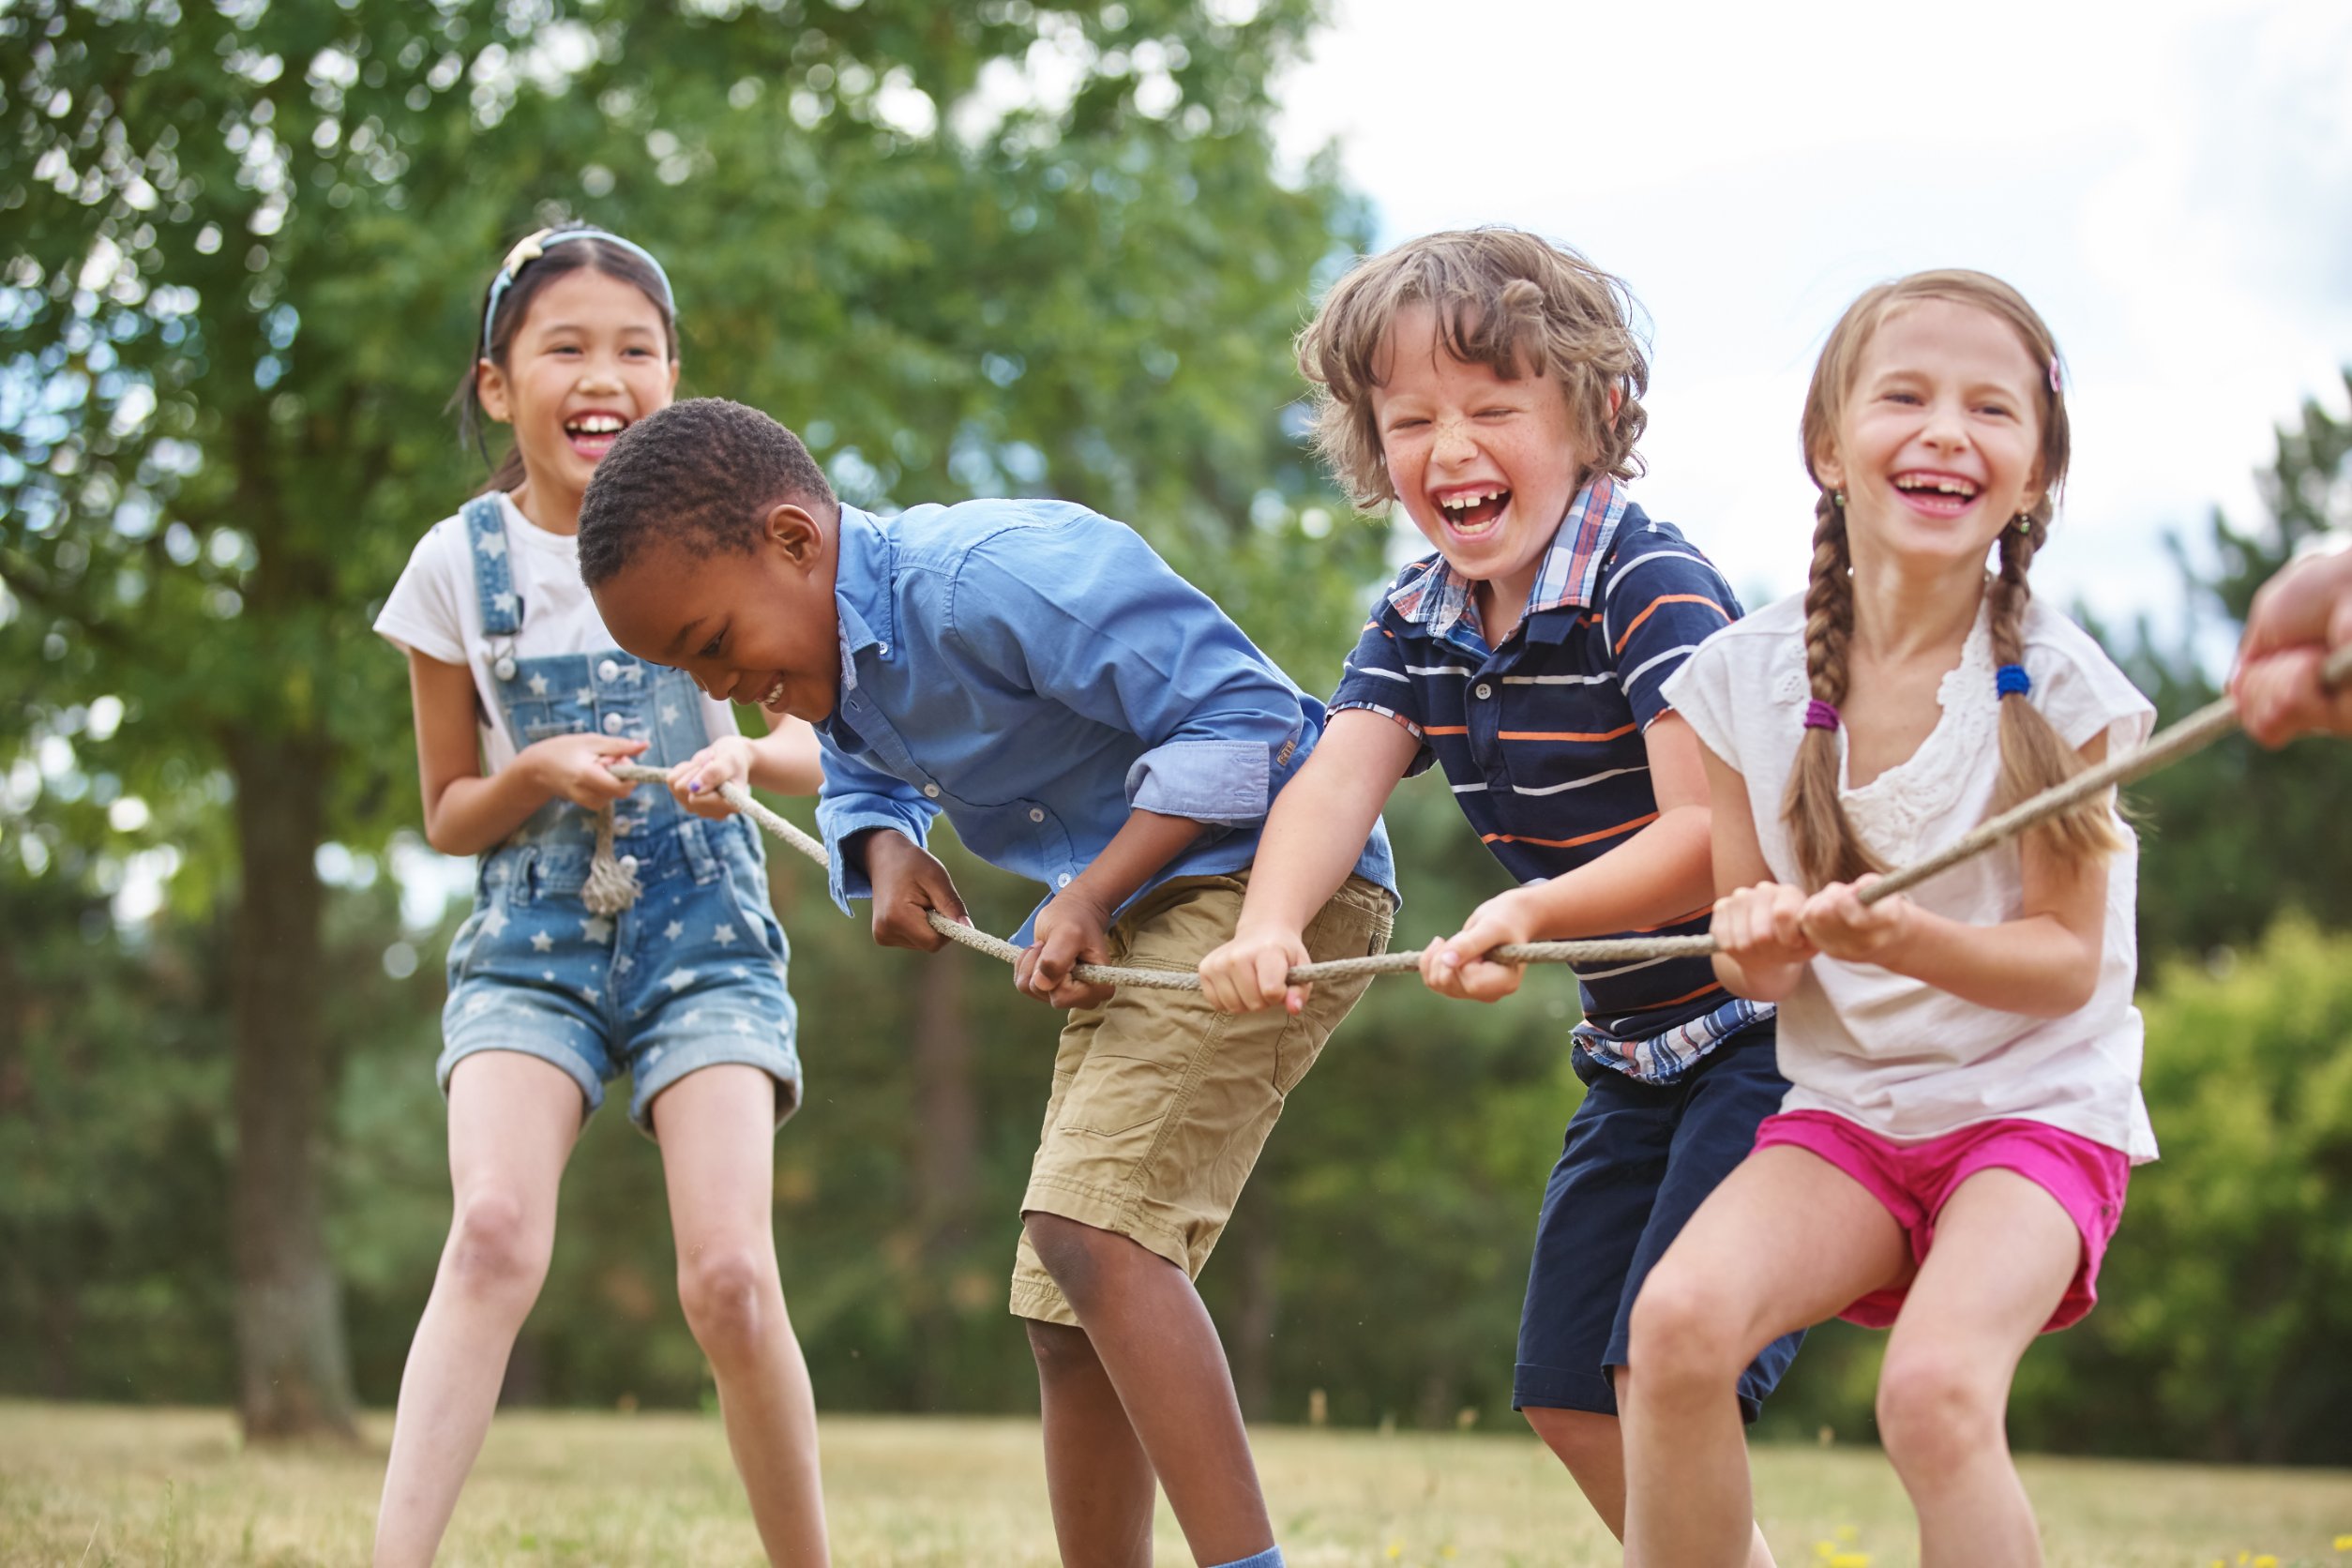 children playing tug of war, all smiling